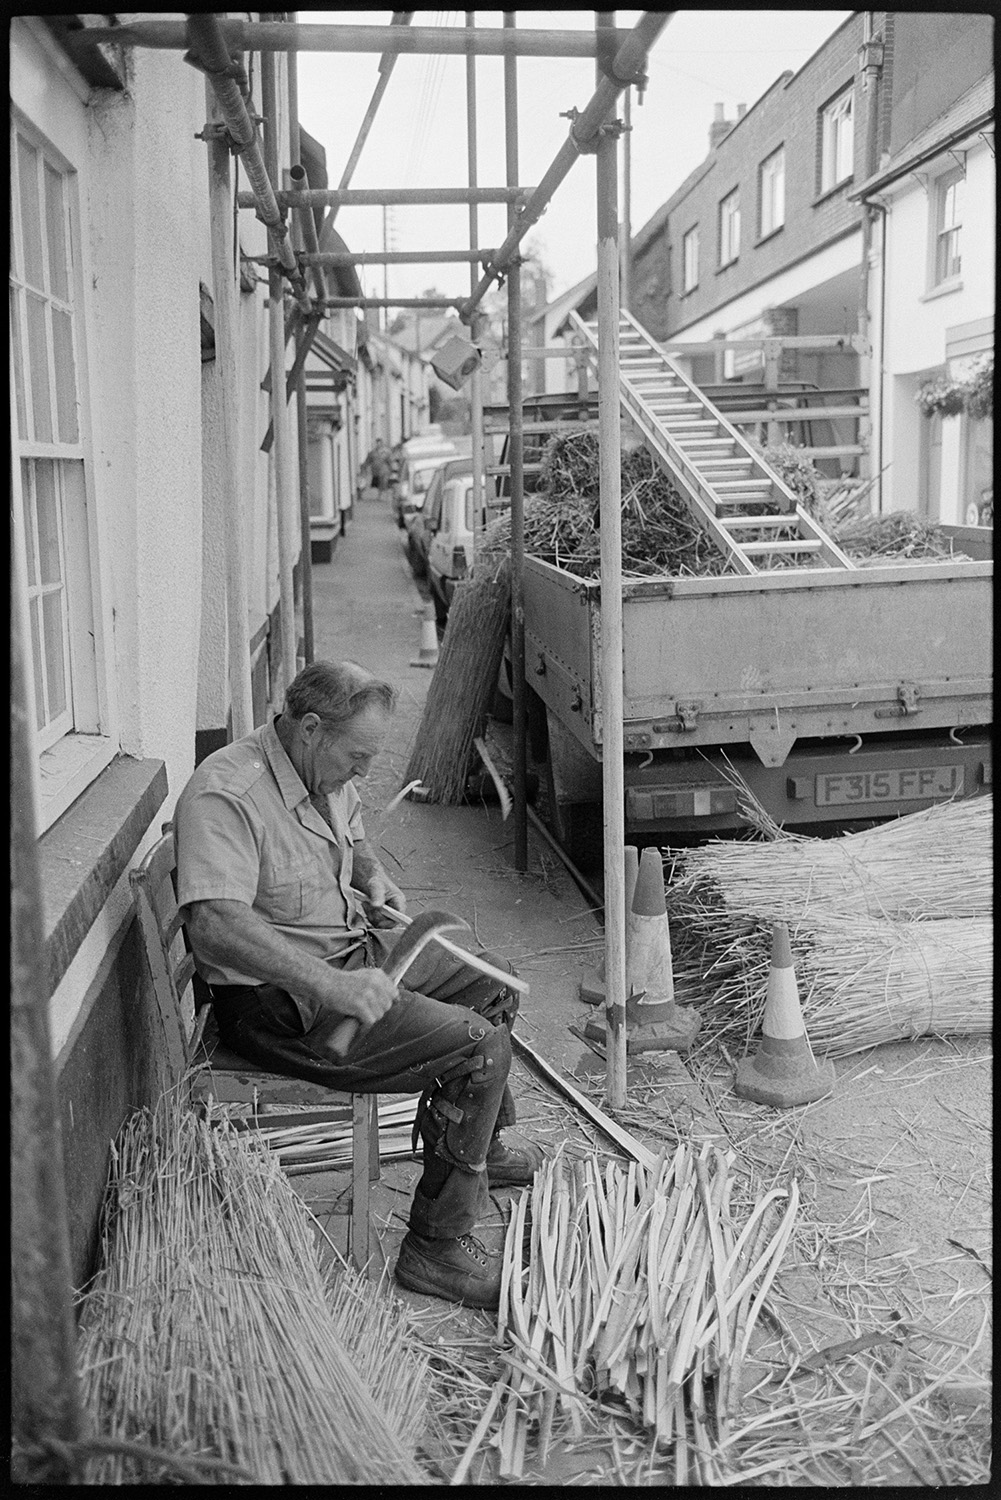 Thatcher cutting spars in village street. 
[A thatcher sat on a chair outside a house in South Molton Street, Chulmleigh, cutting spars for thatching using a billhook. Scaffolding, nitches of reed and a truck with a ladder are visible in the street.]